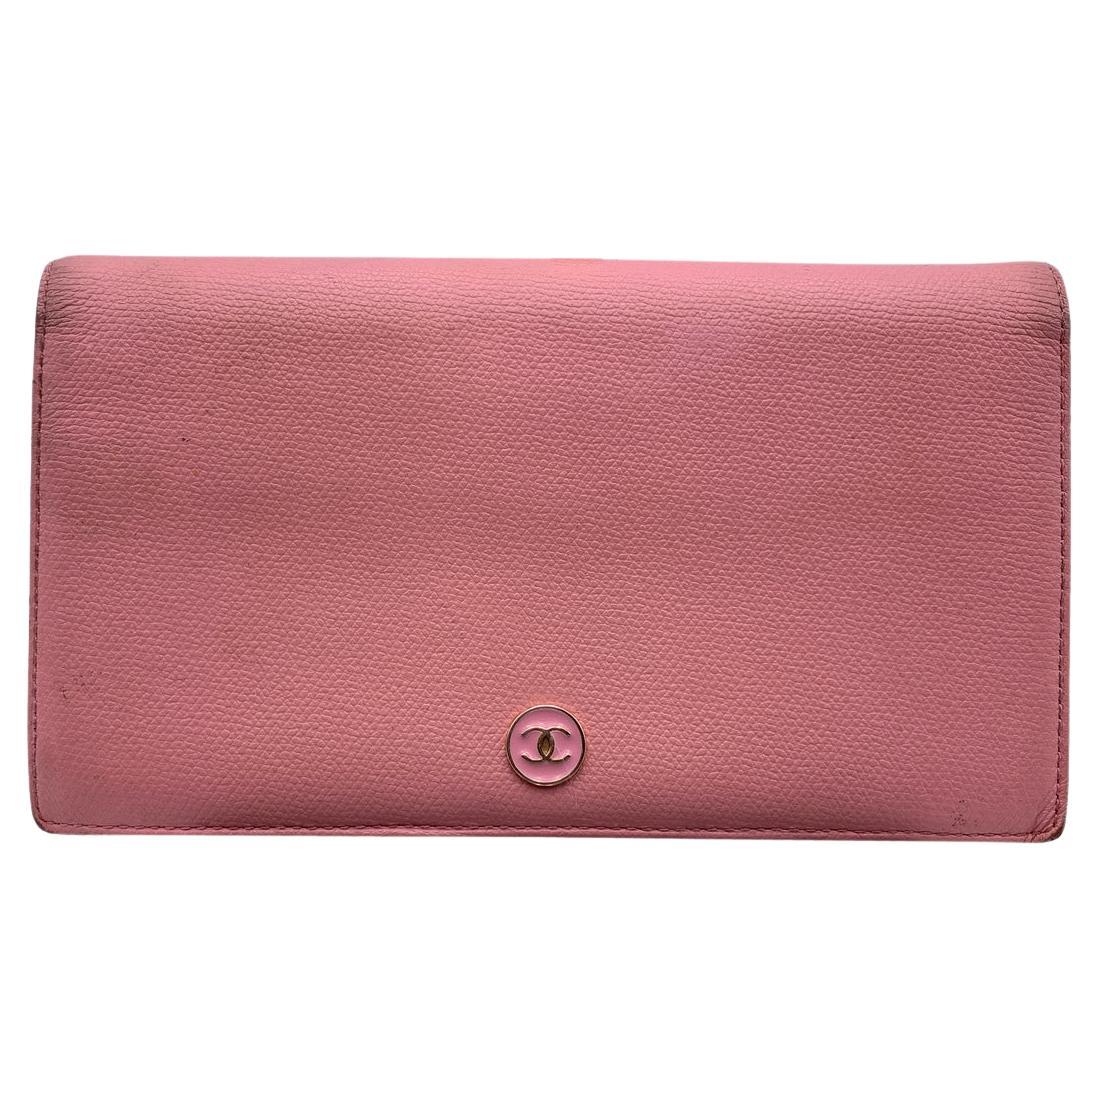  Chanel Pink Leather Long Continental Bifold Wallet with CC Logo